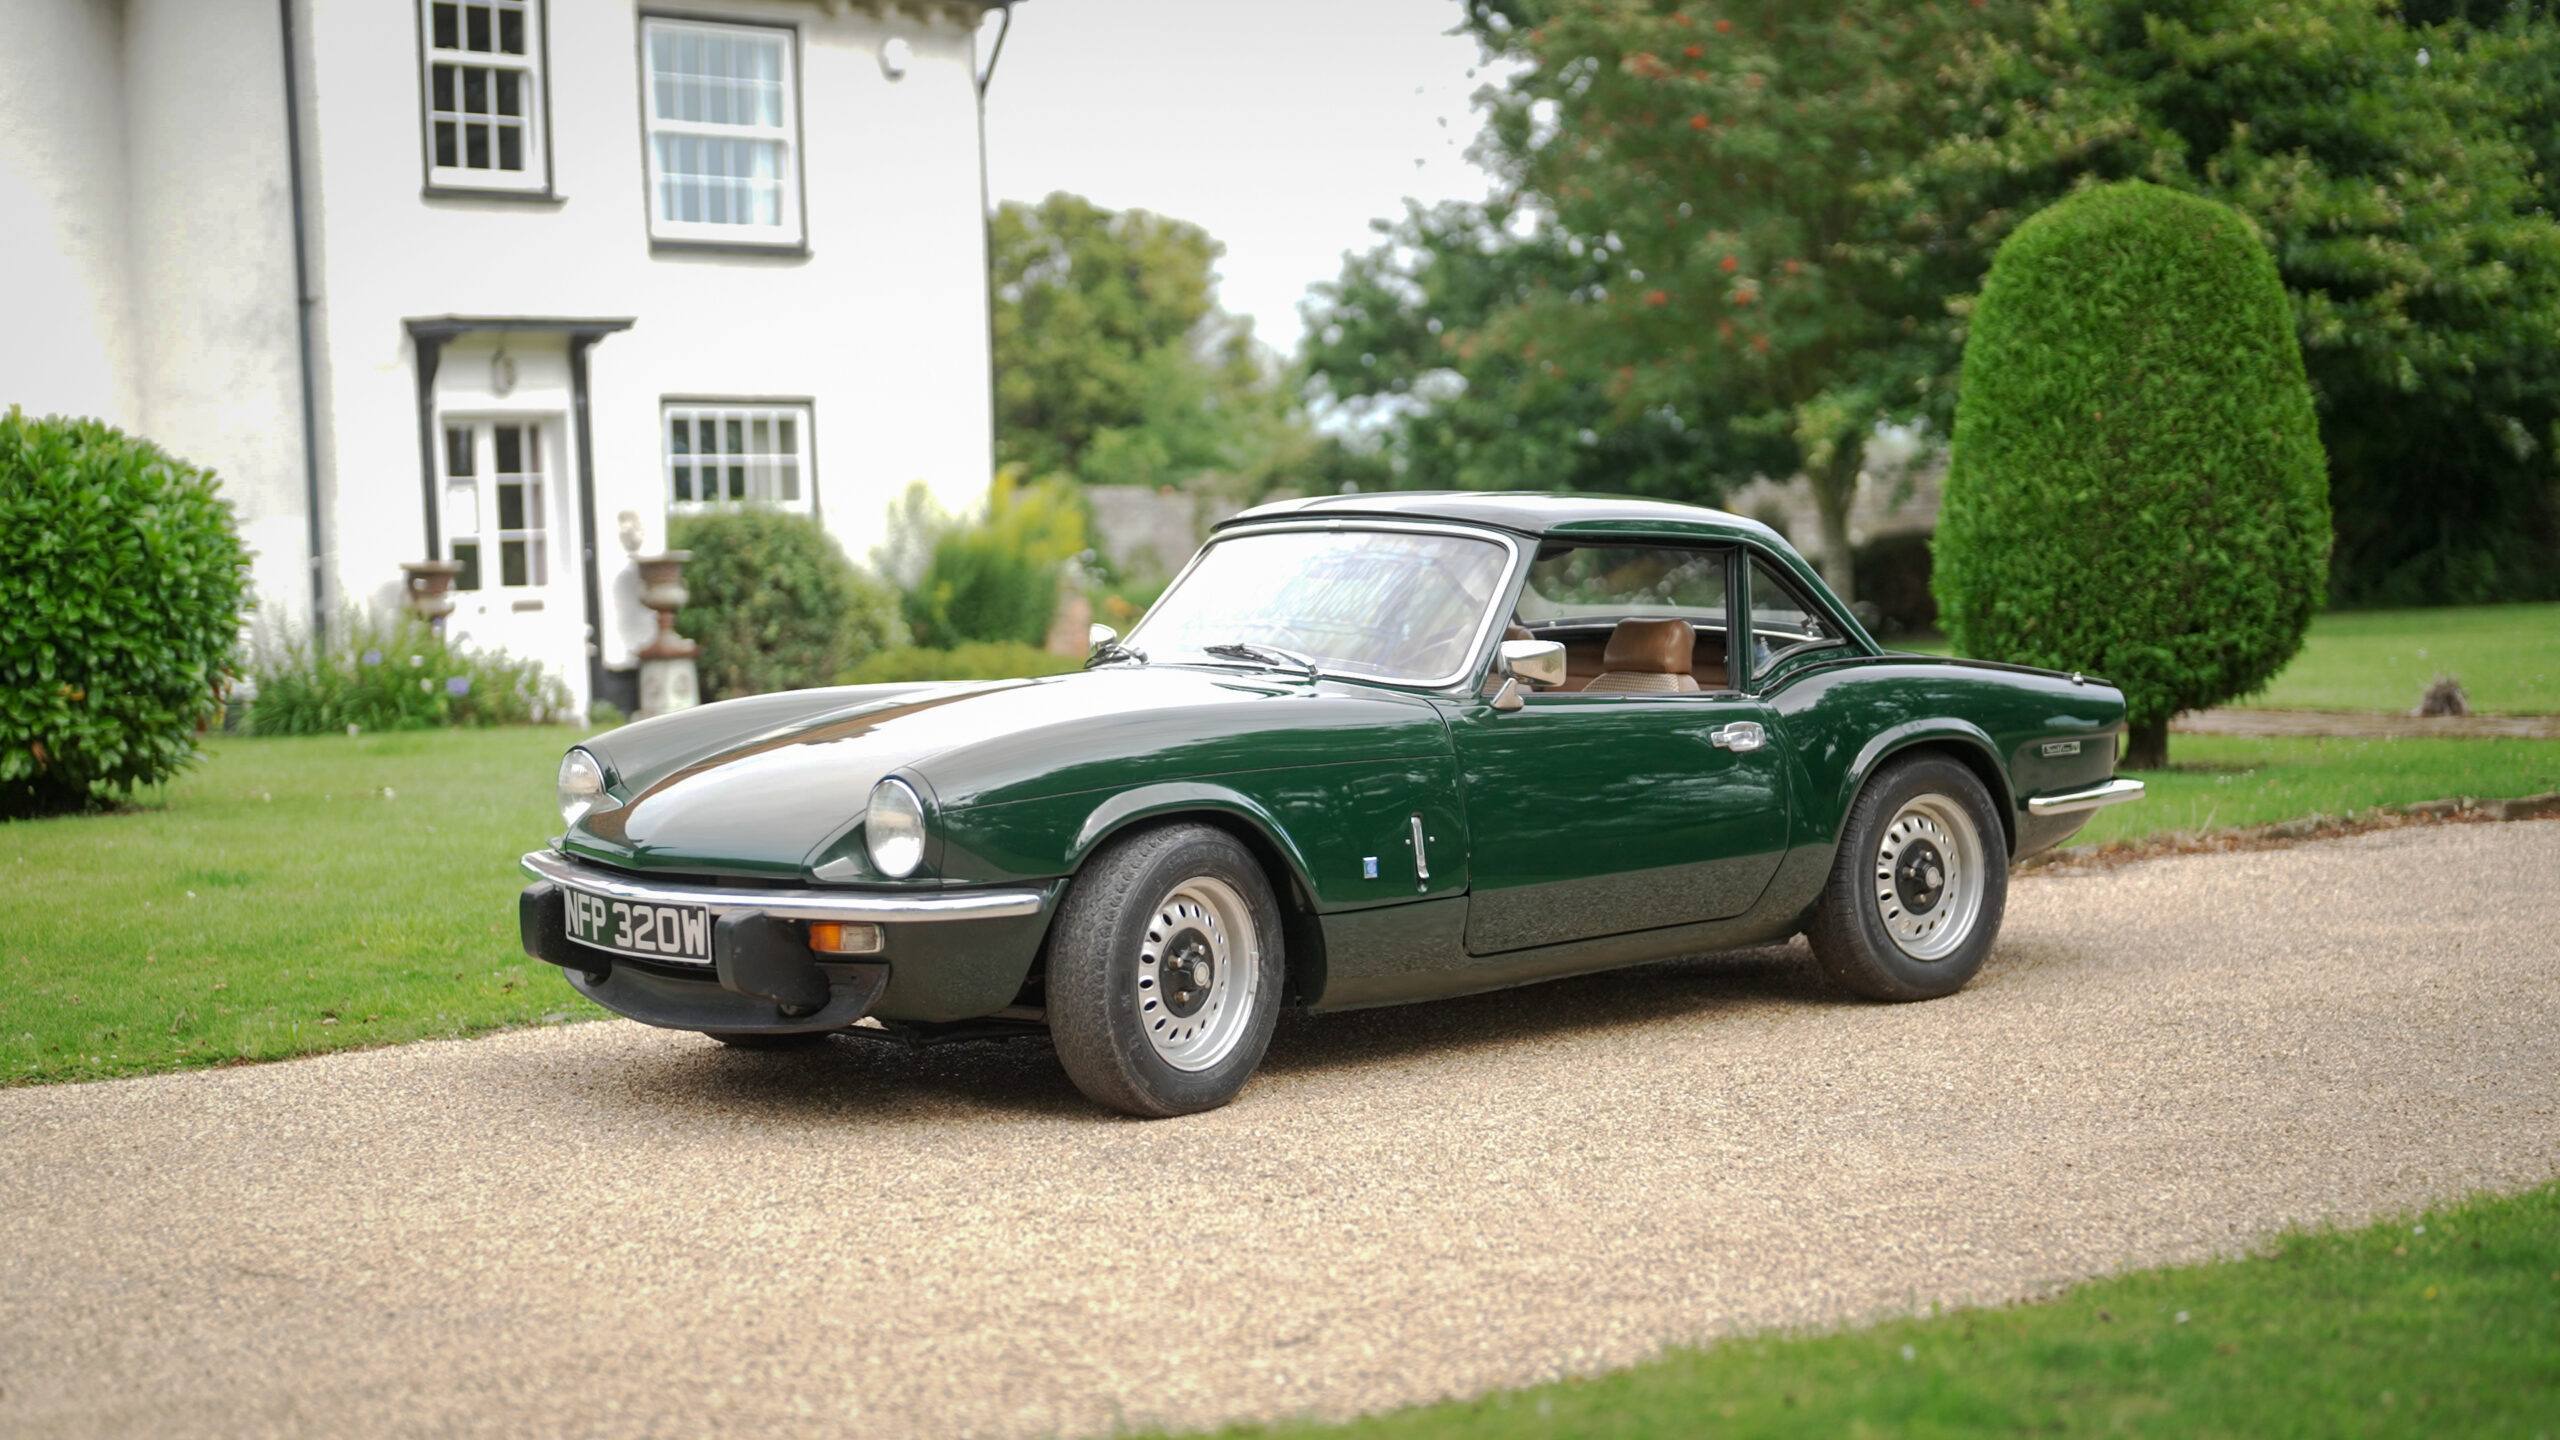 1980 Triumph Spitfire Vintage and Classic Car Competitions